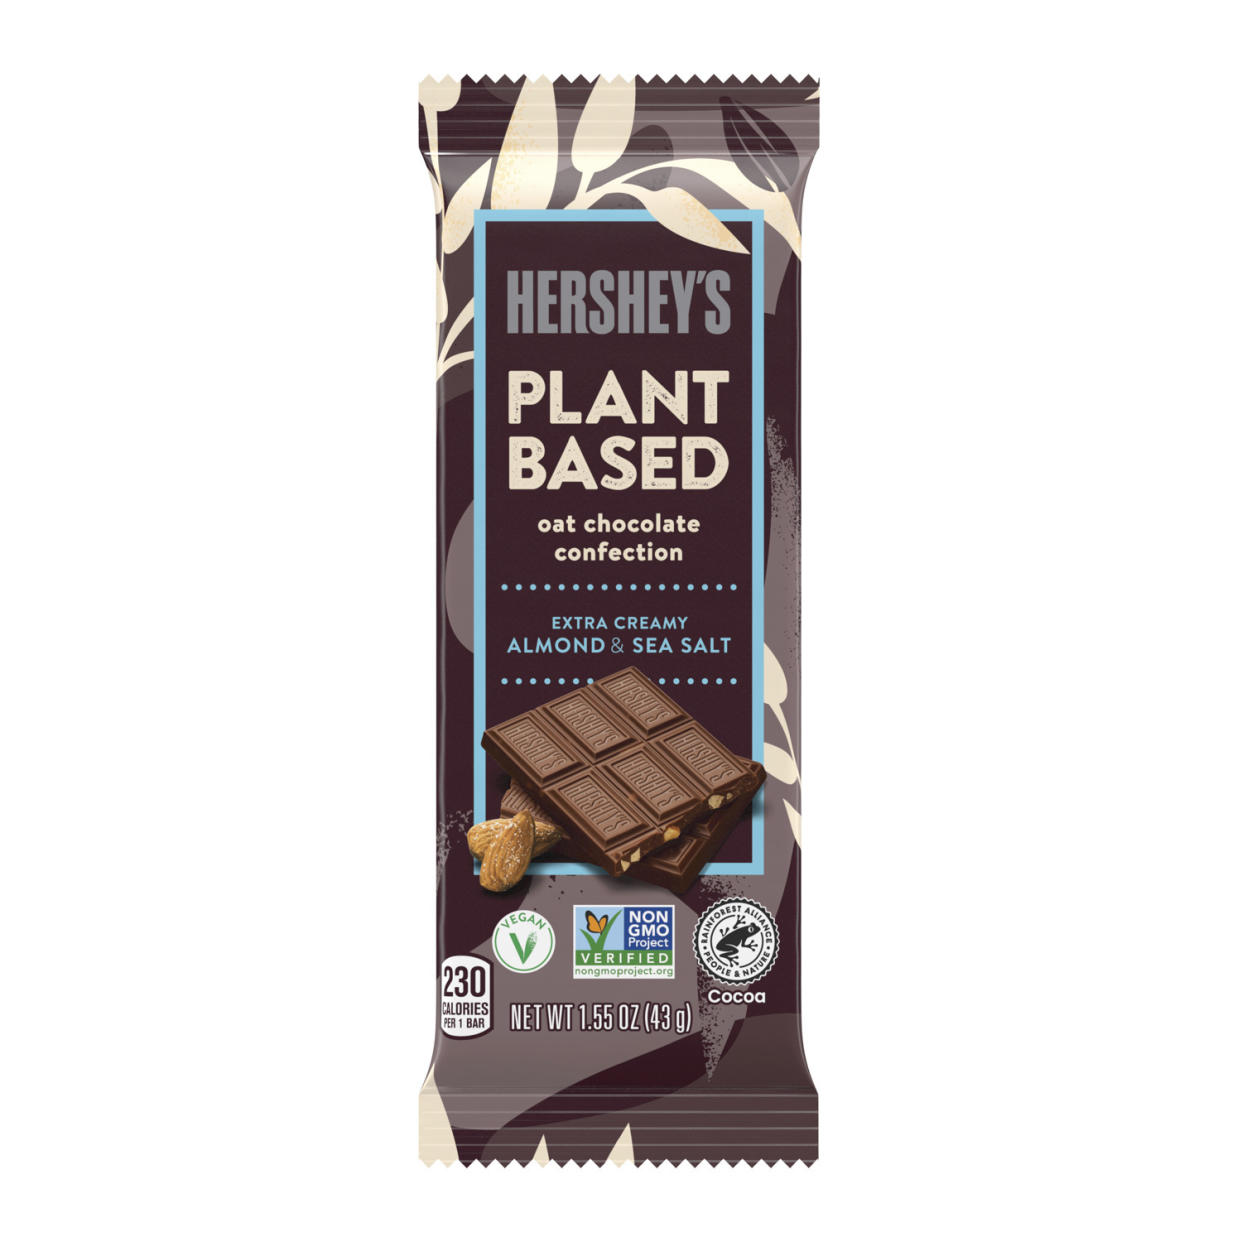 This image provided by The Hershey Company shows the company's new Hershey’s plant-based extra creamy with almonds and sea salt. The company said Tuesday, March 7, 2023, that Reese’s plant-based peanut butter cups will be its first plant-based chocolate sold nationally when they go on sale in March. A second vegan offering, Hershey’s plant-based extra creamy with almonds and sea salt, will follow in April. (The Hershey Company via AP)